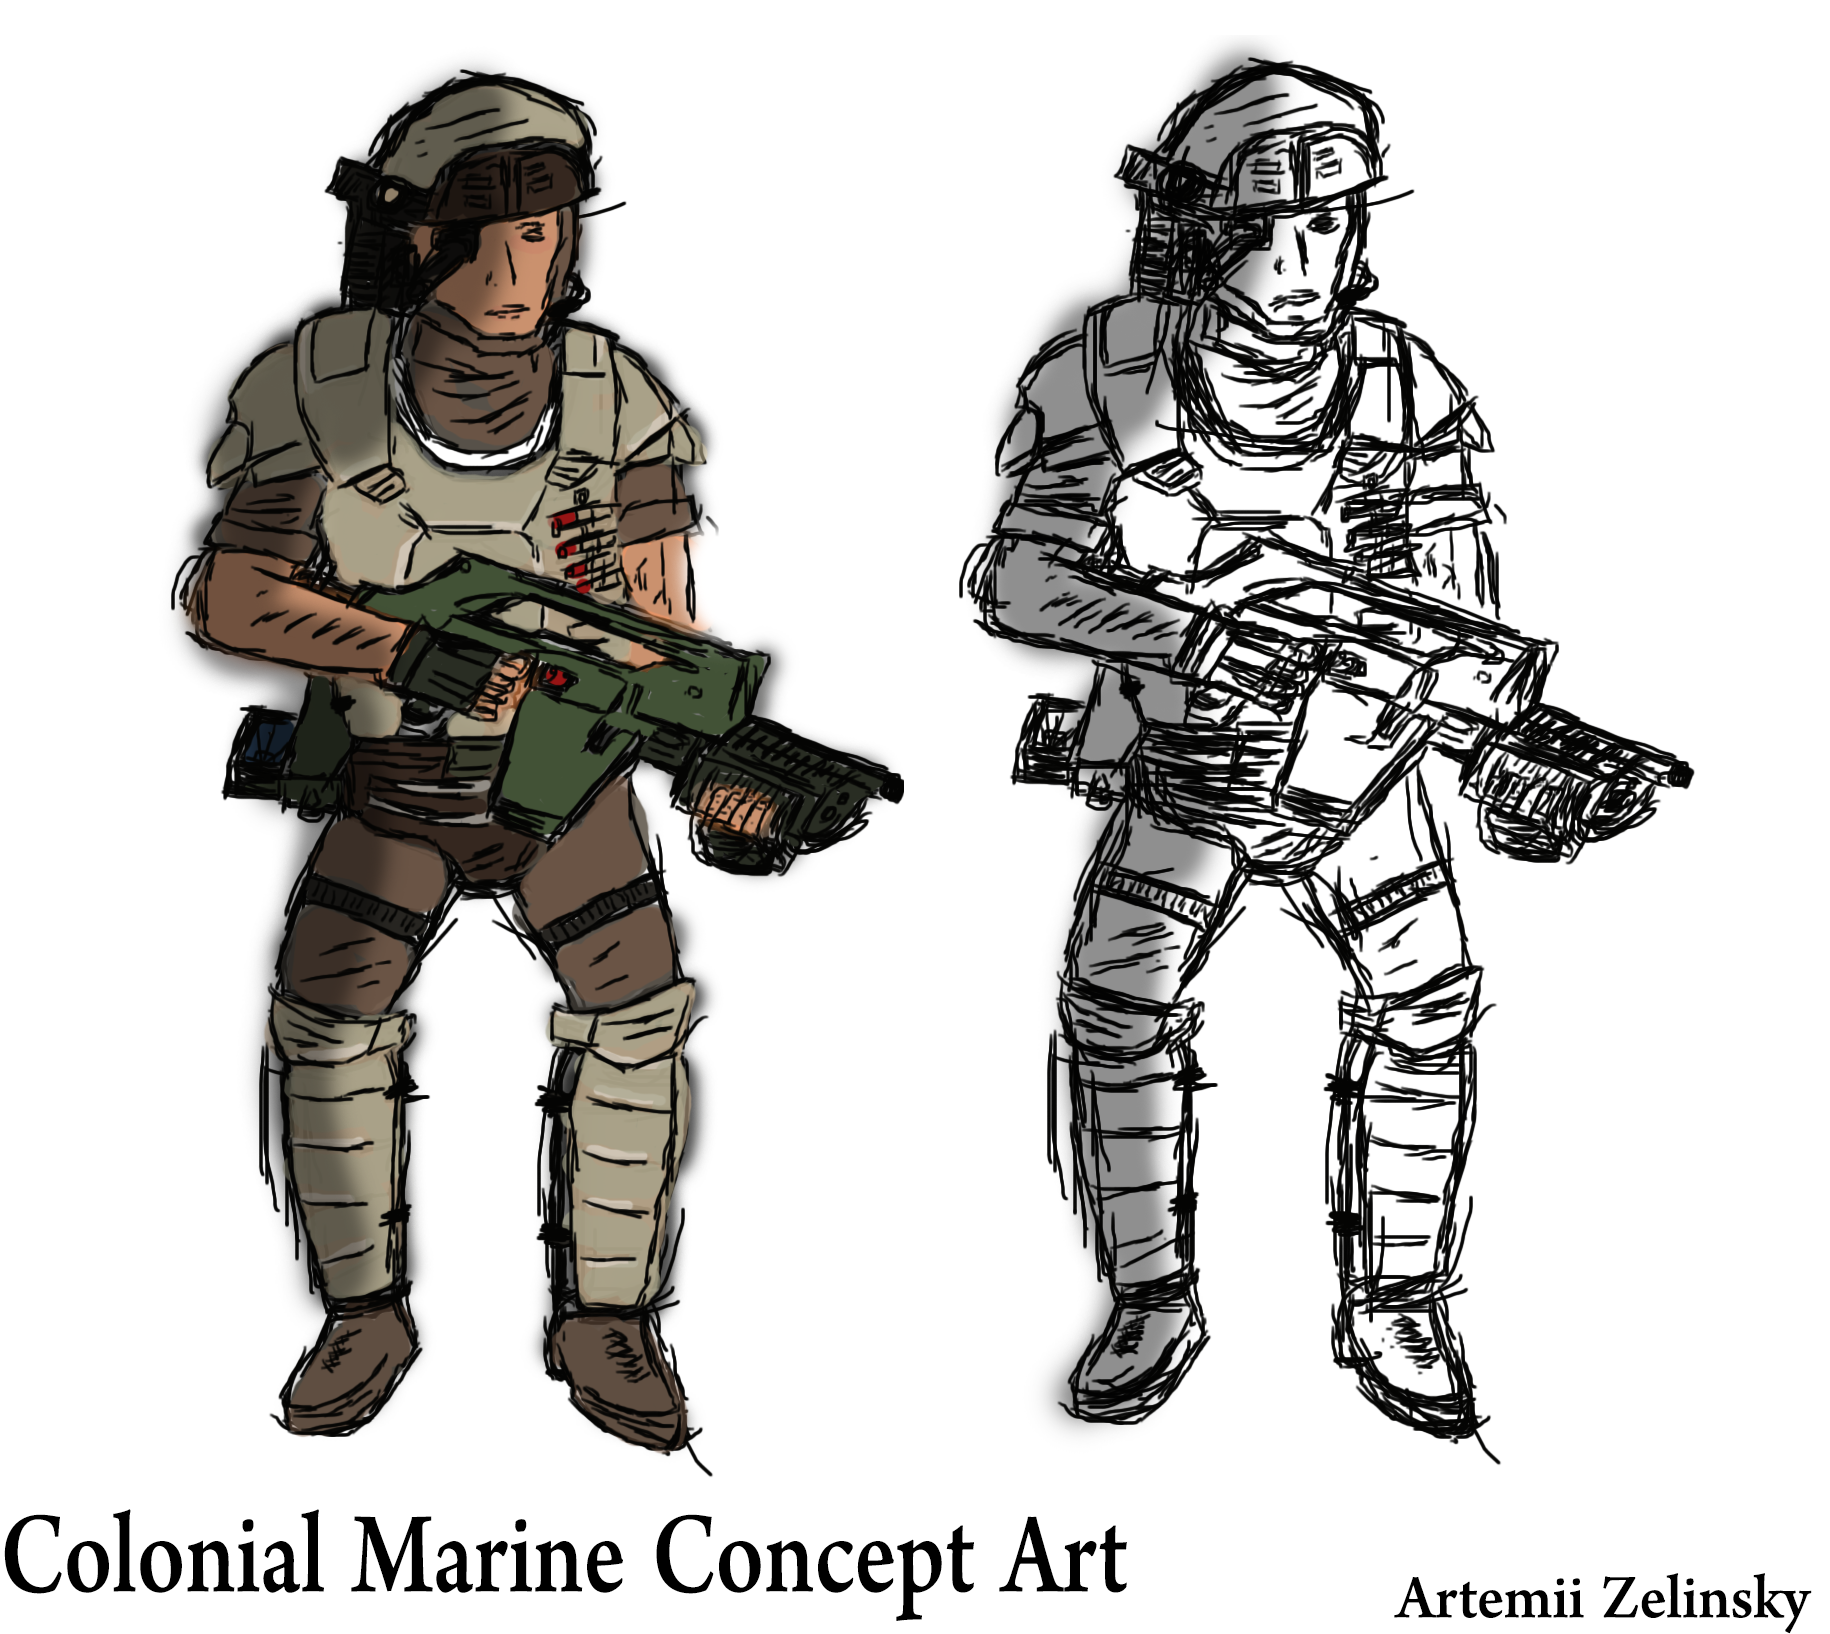 Gallery of Colonial Marines Concept Art.